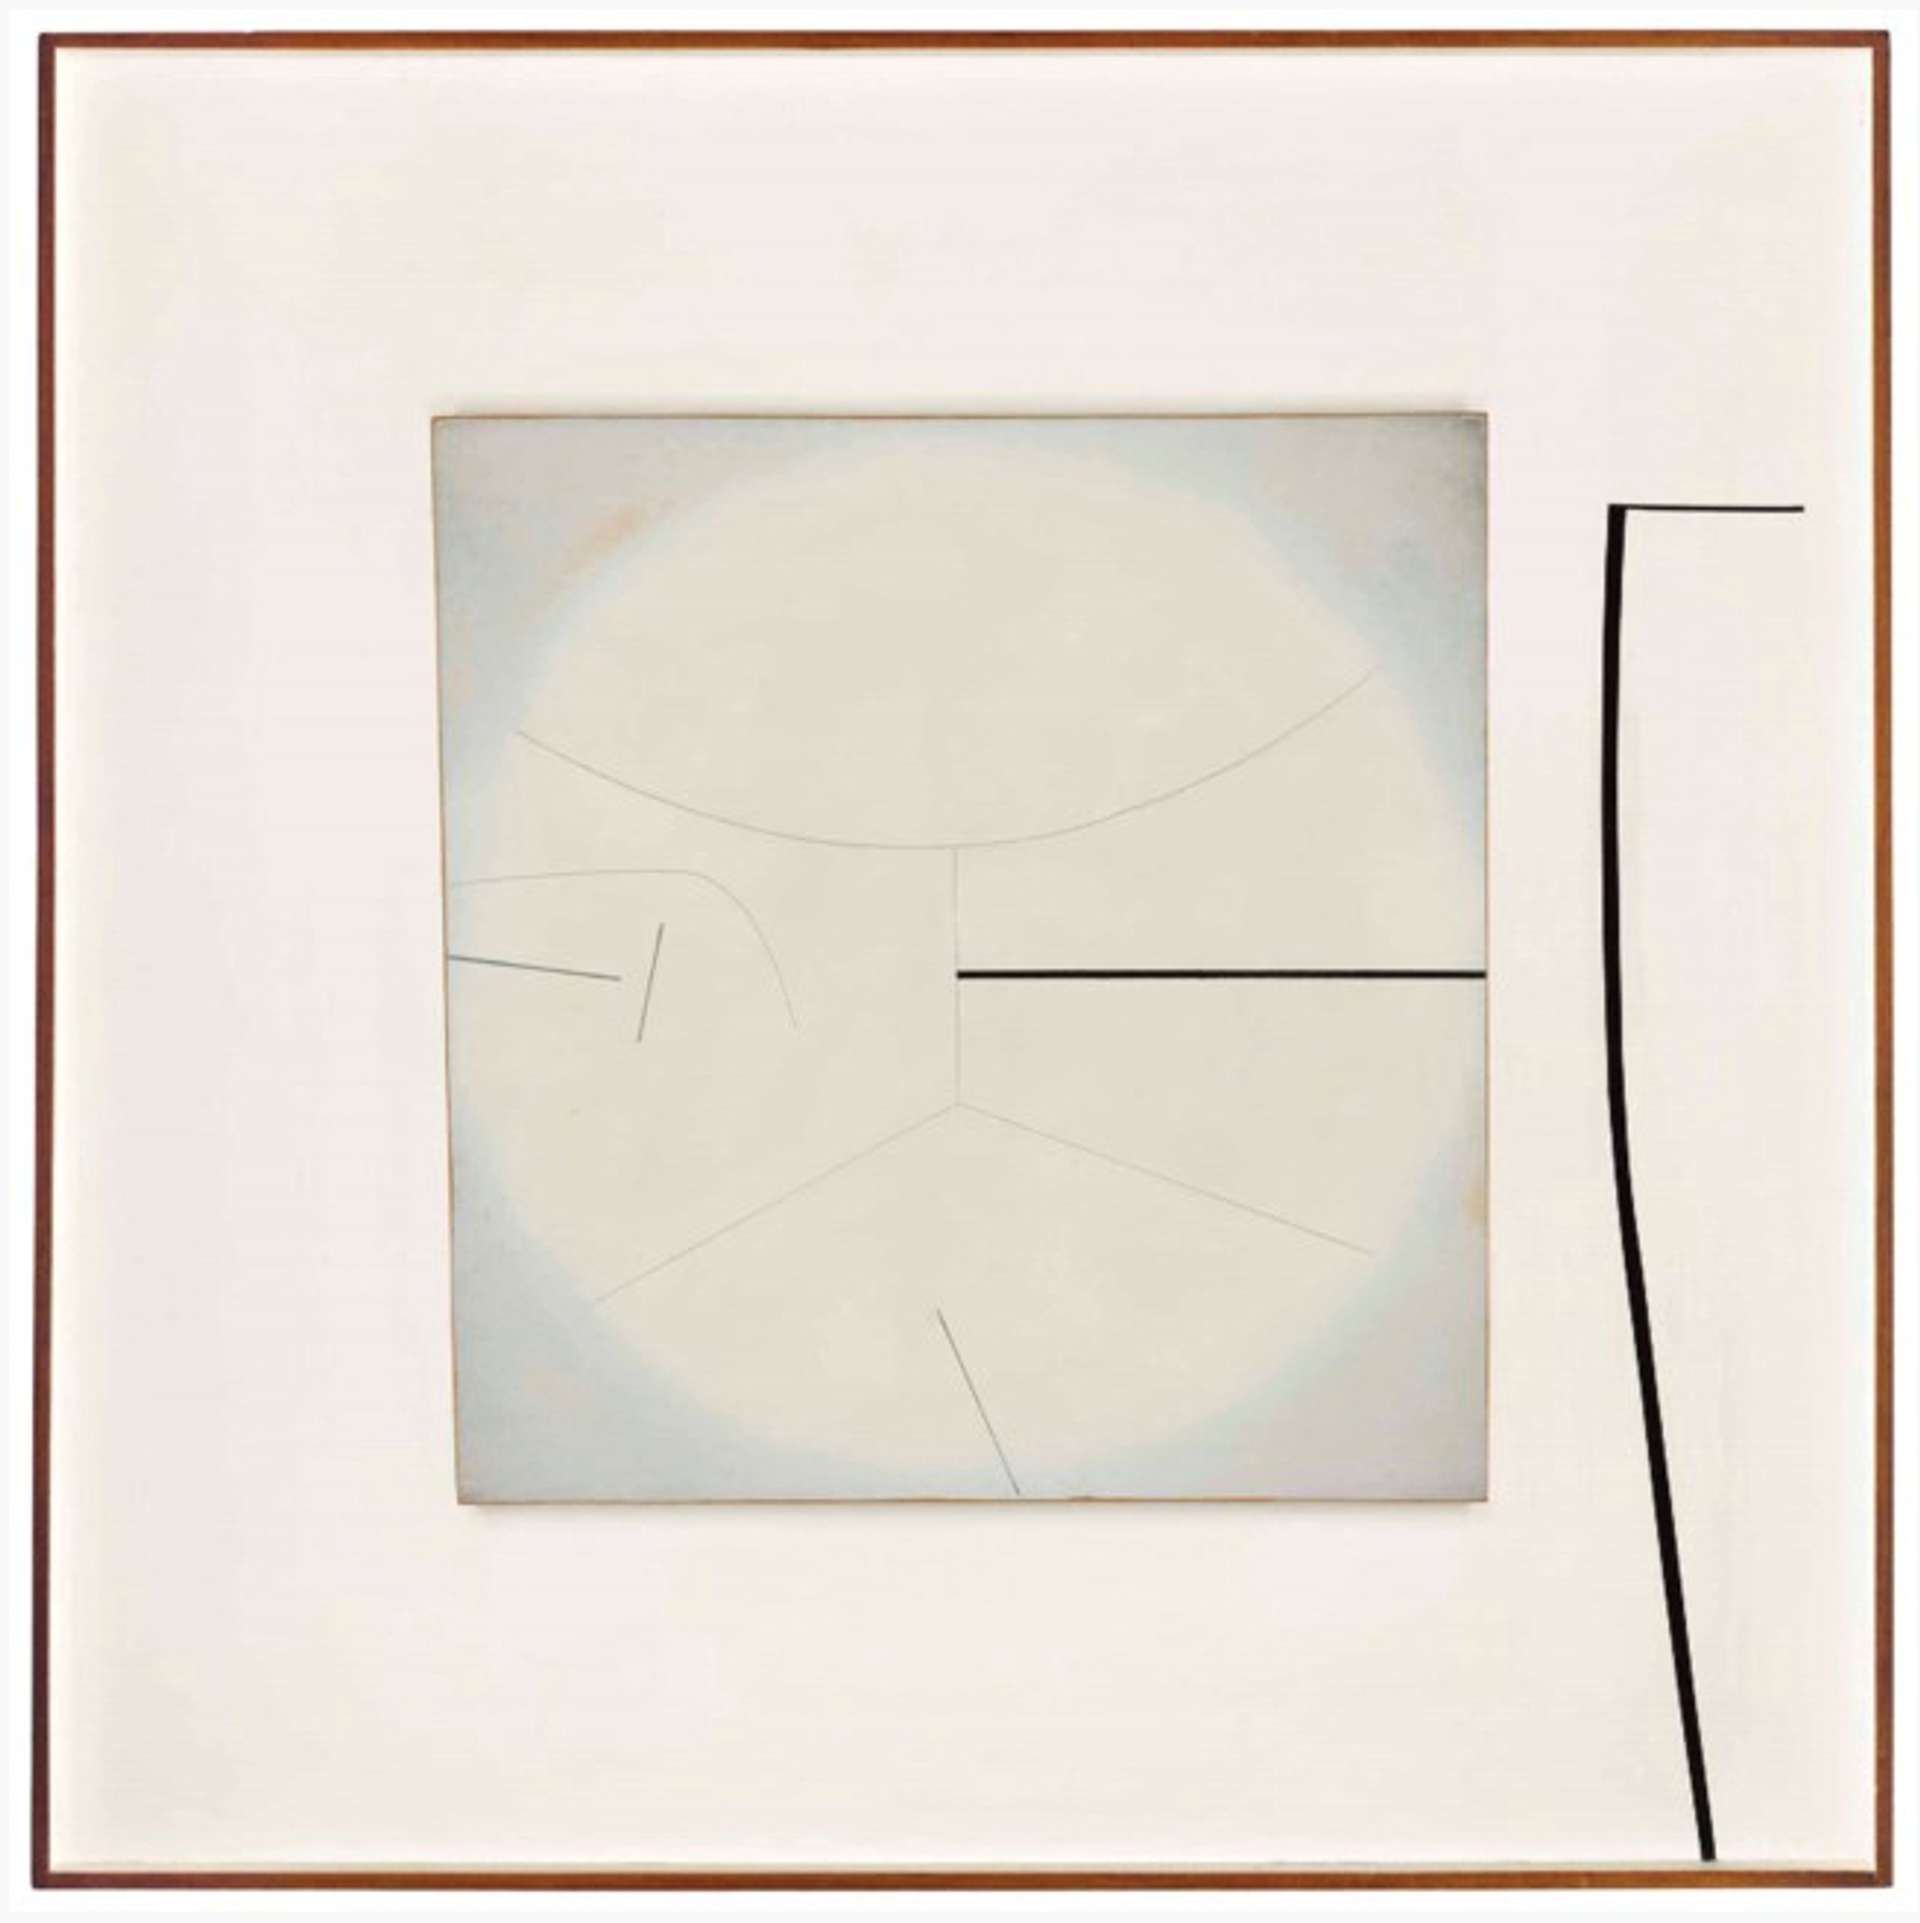  A small square canvas with a barely visible white gradient circle in the middle of the square is placed against a white canvas and framed by a thin brown wooden frame. The centre of the circle is intersected with a thin black horizontal line, and a vertical line protrudes upwards from the left-hand side of the artwork at a right angle.